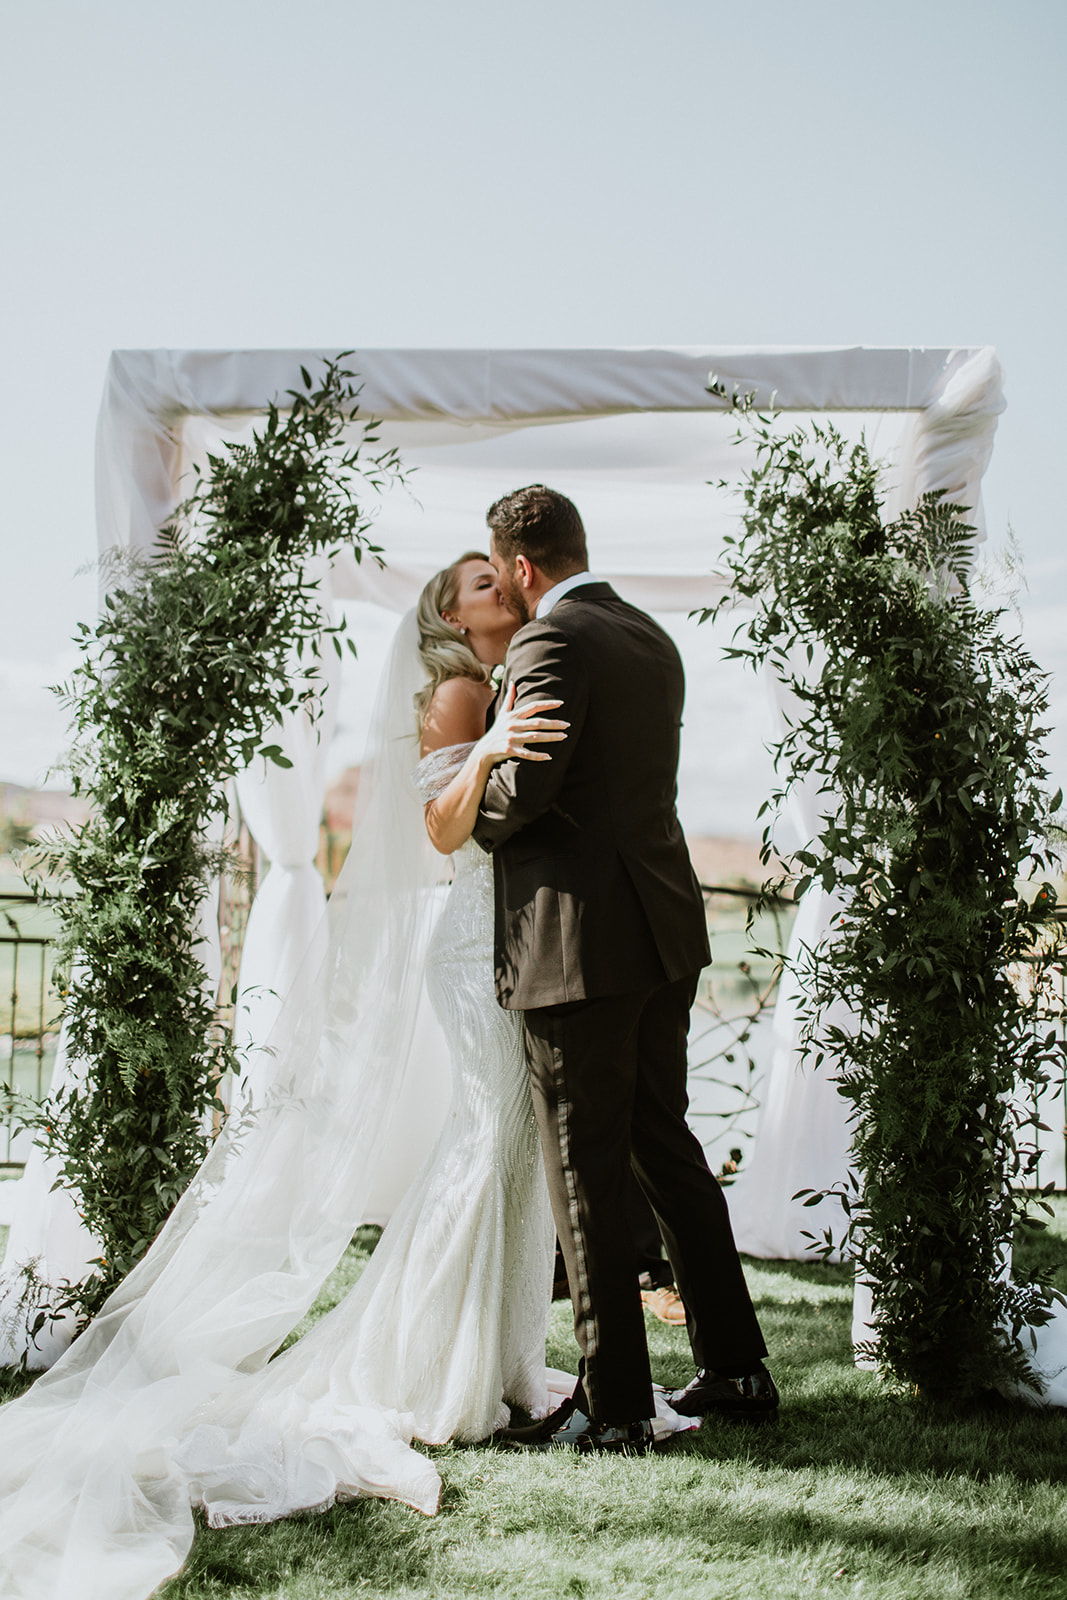 Newlyweds First Kiss under Chuppah with Greenery 